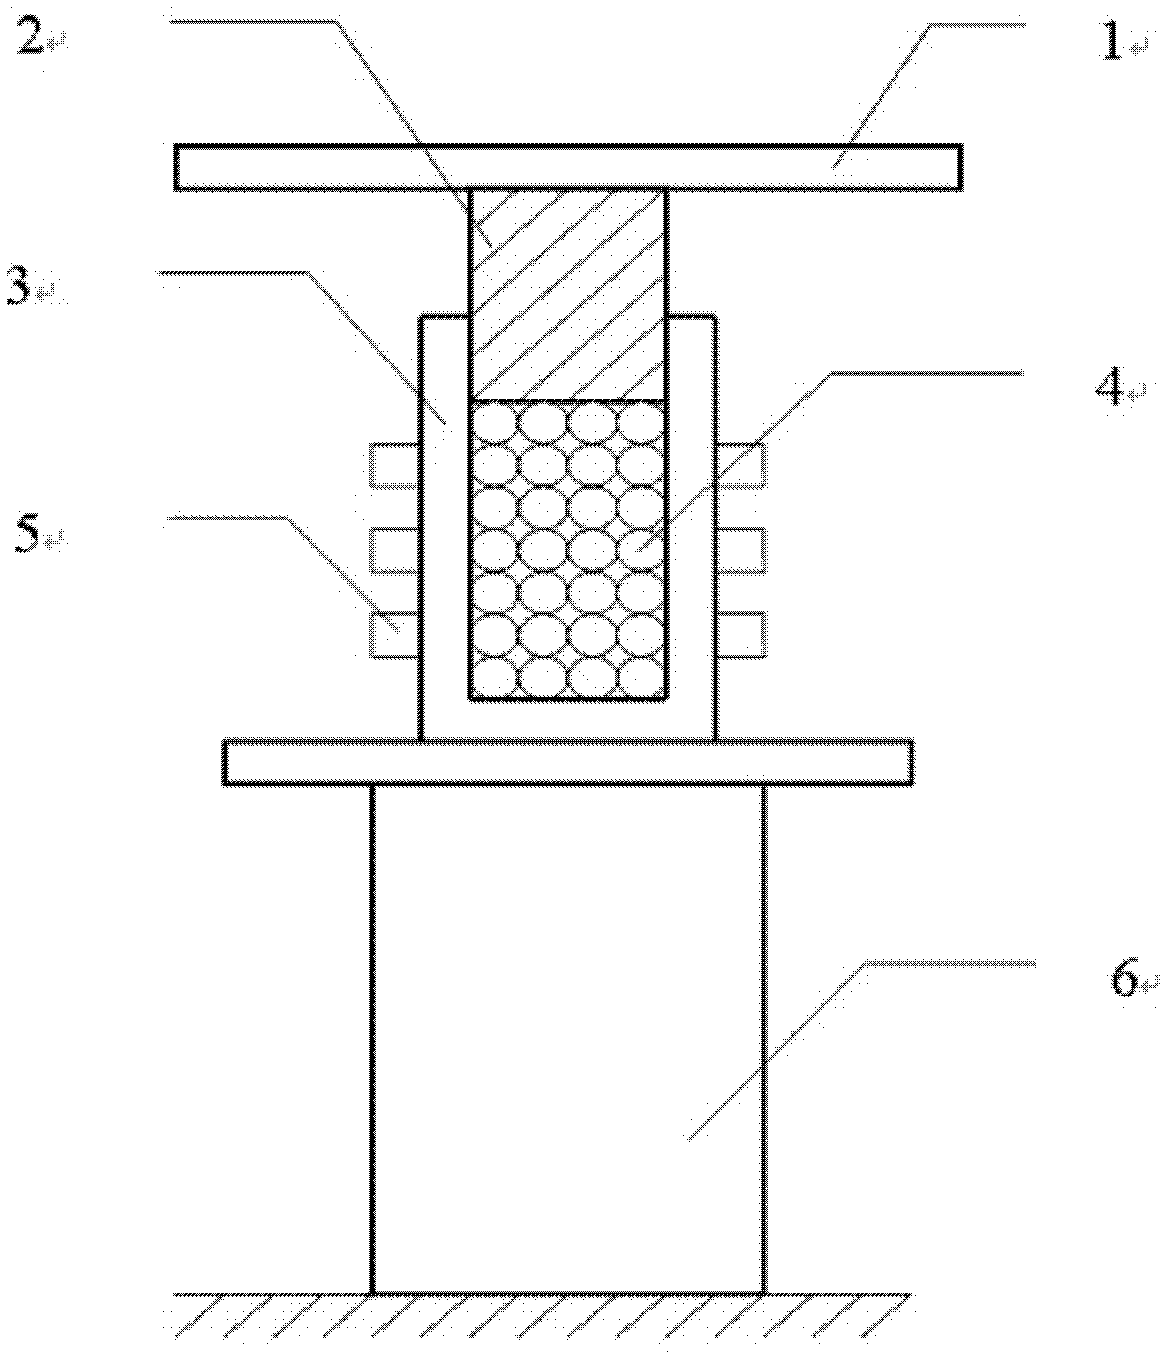 Application method of detachable carrying device